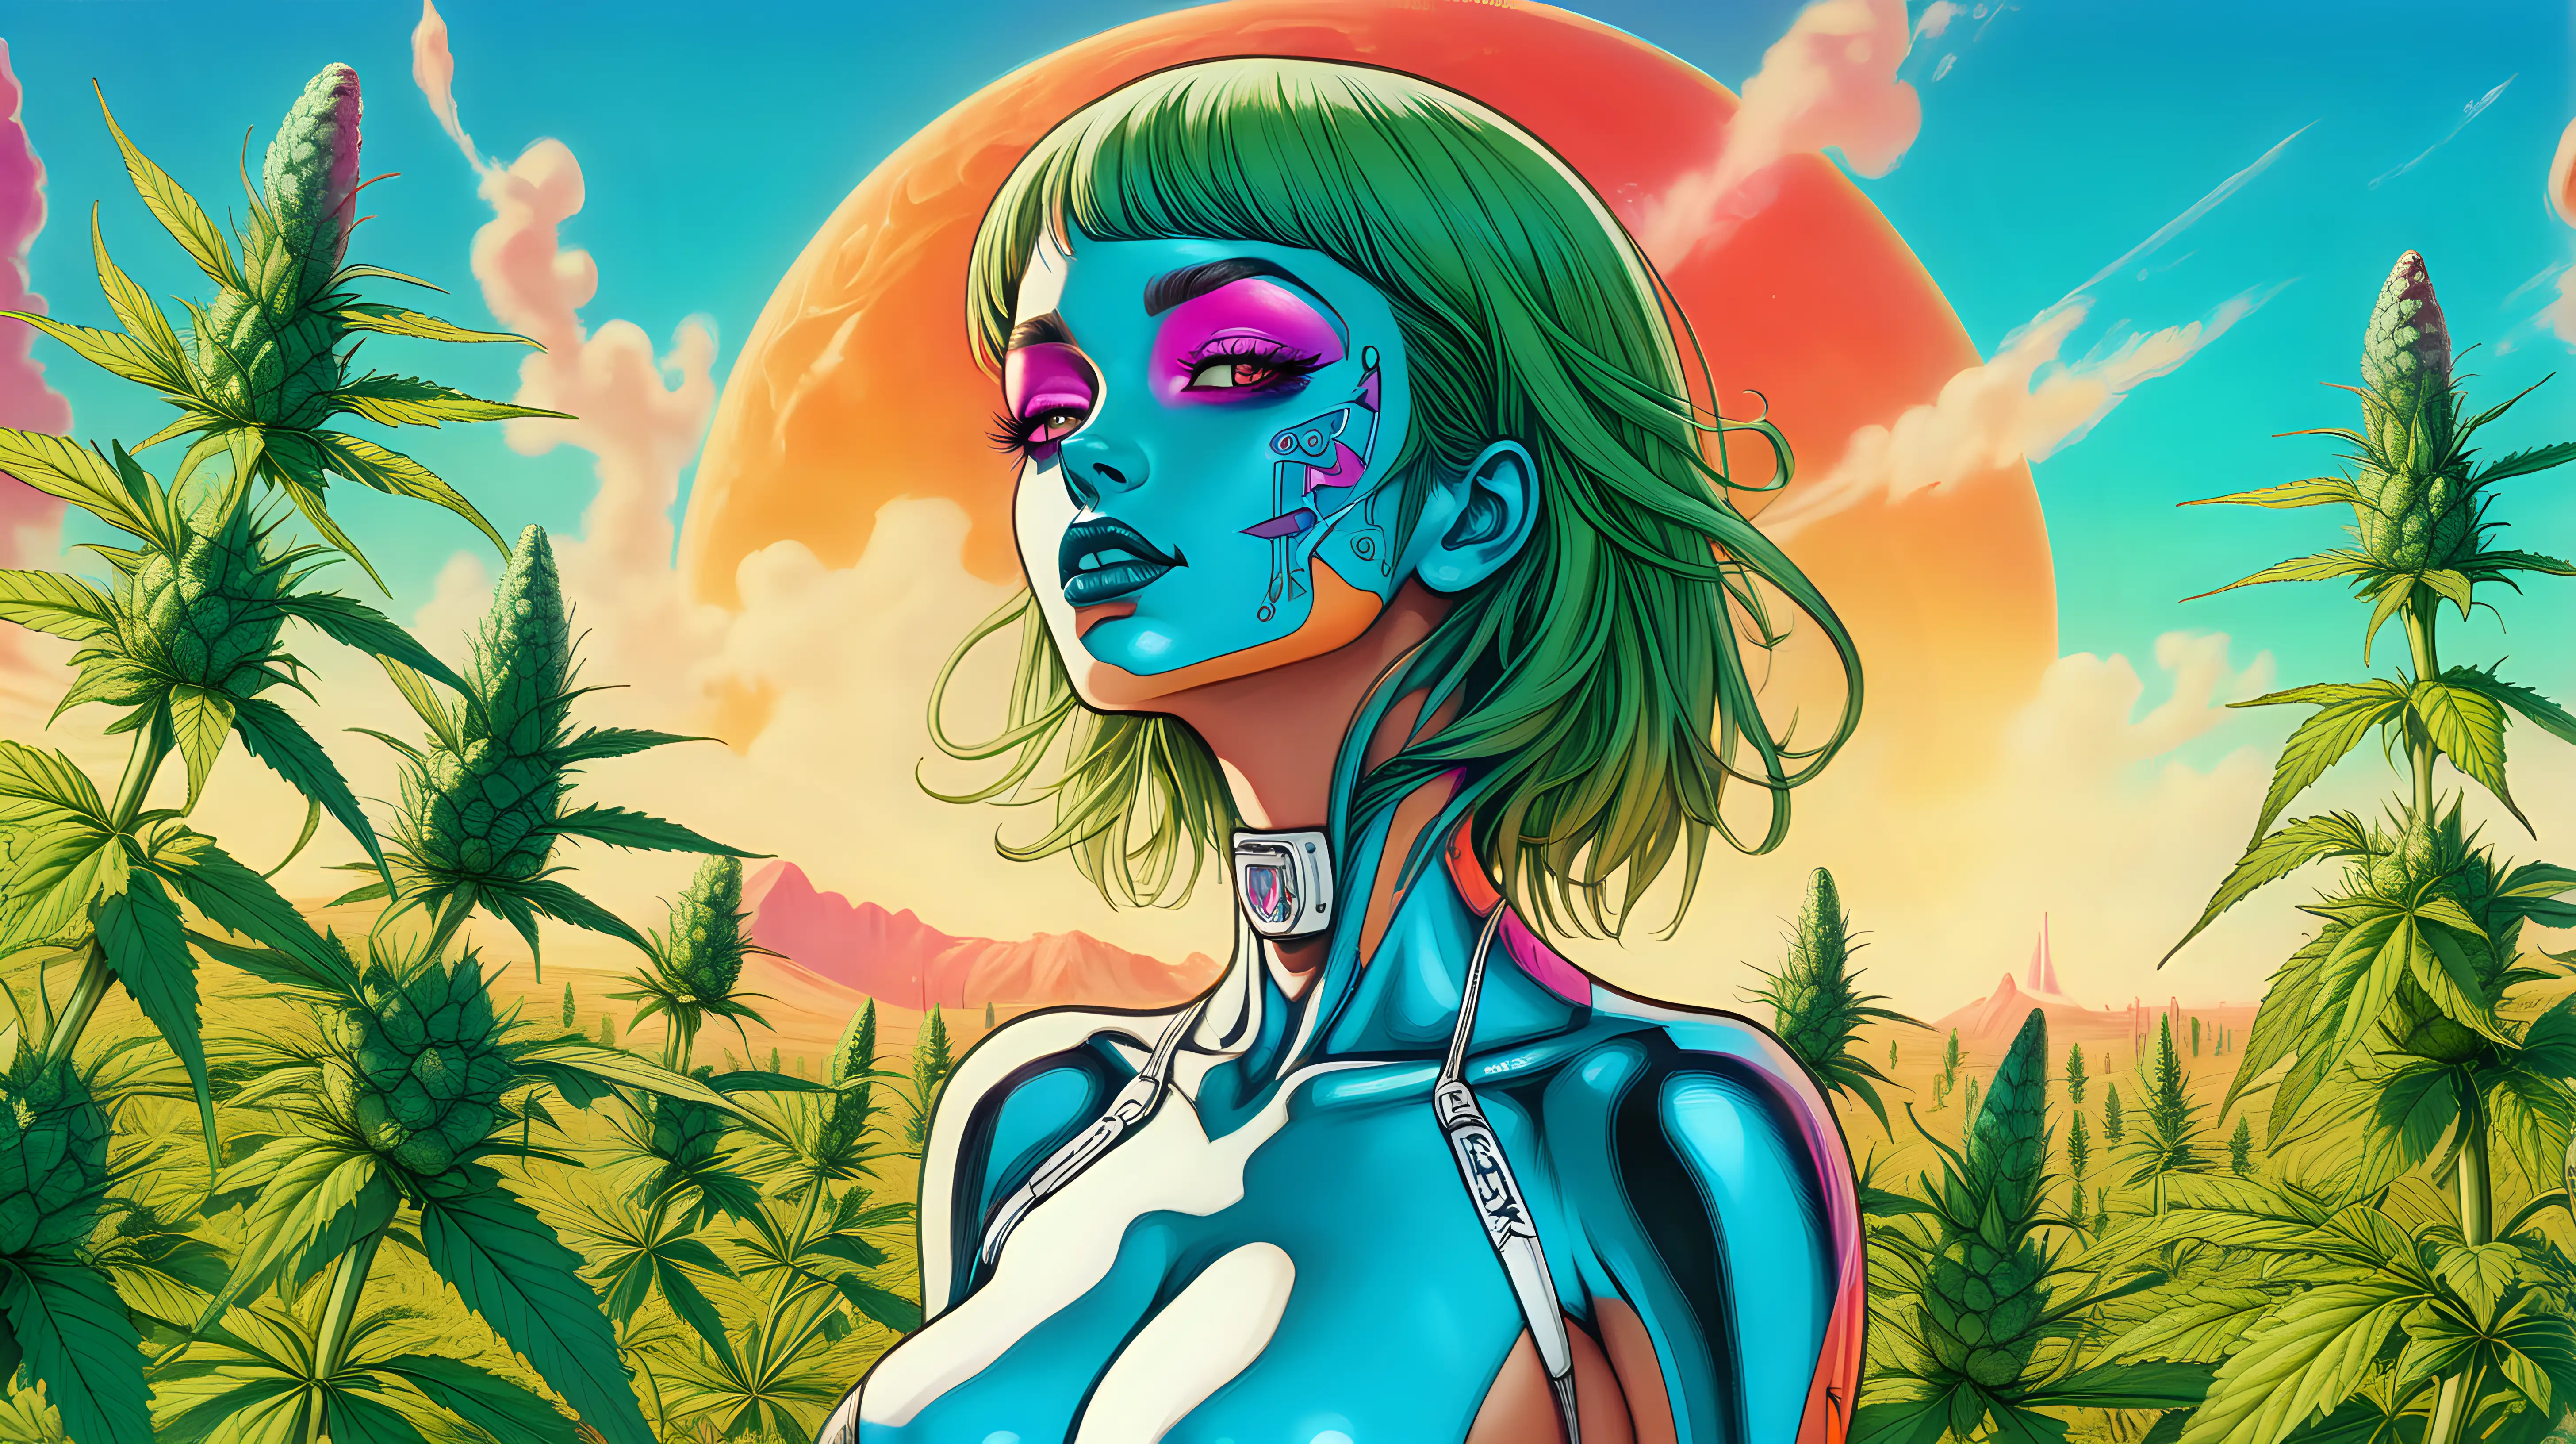 Exotic Alien Woman Amidst Cannabis Fields with Vibrant Sky